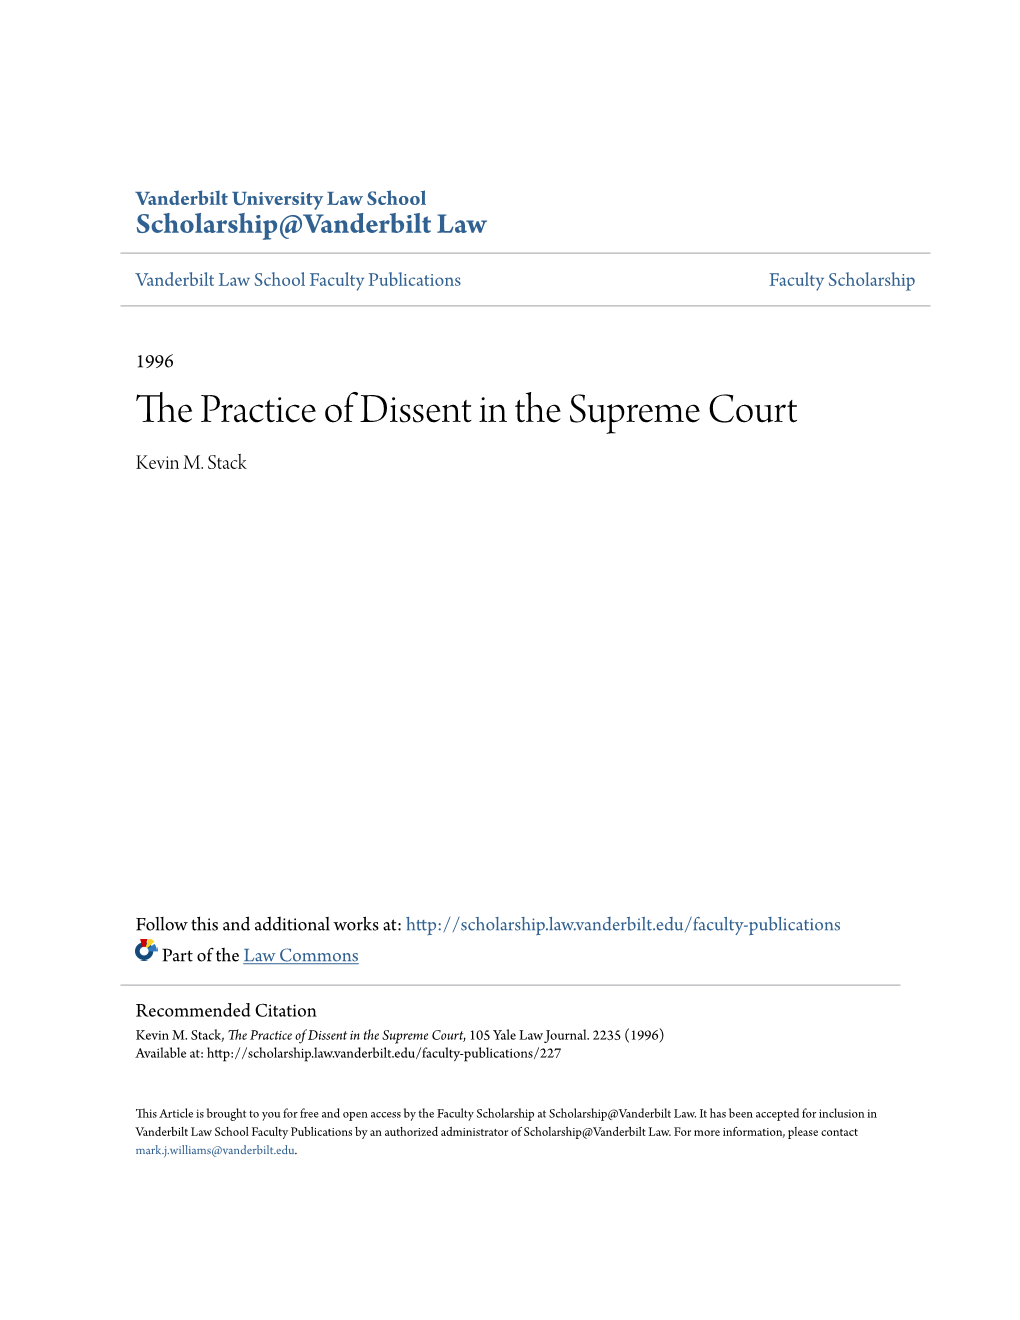 The Practice of Dissent in the Supreme Court, 105 Yale Law Journal